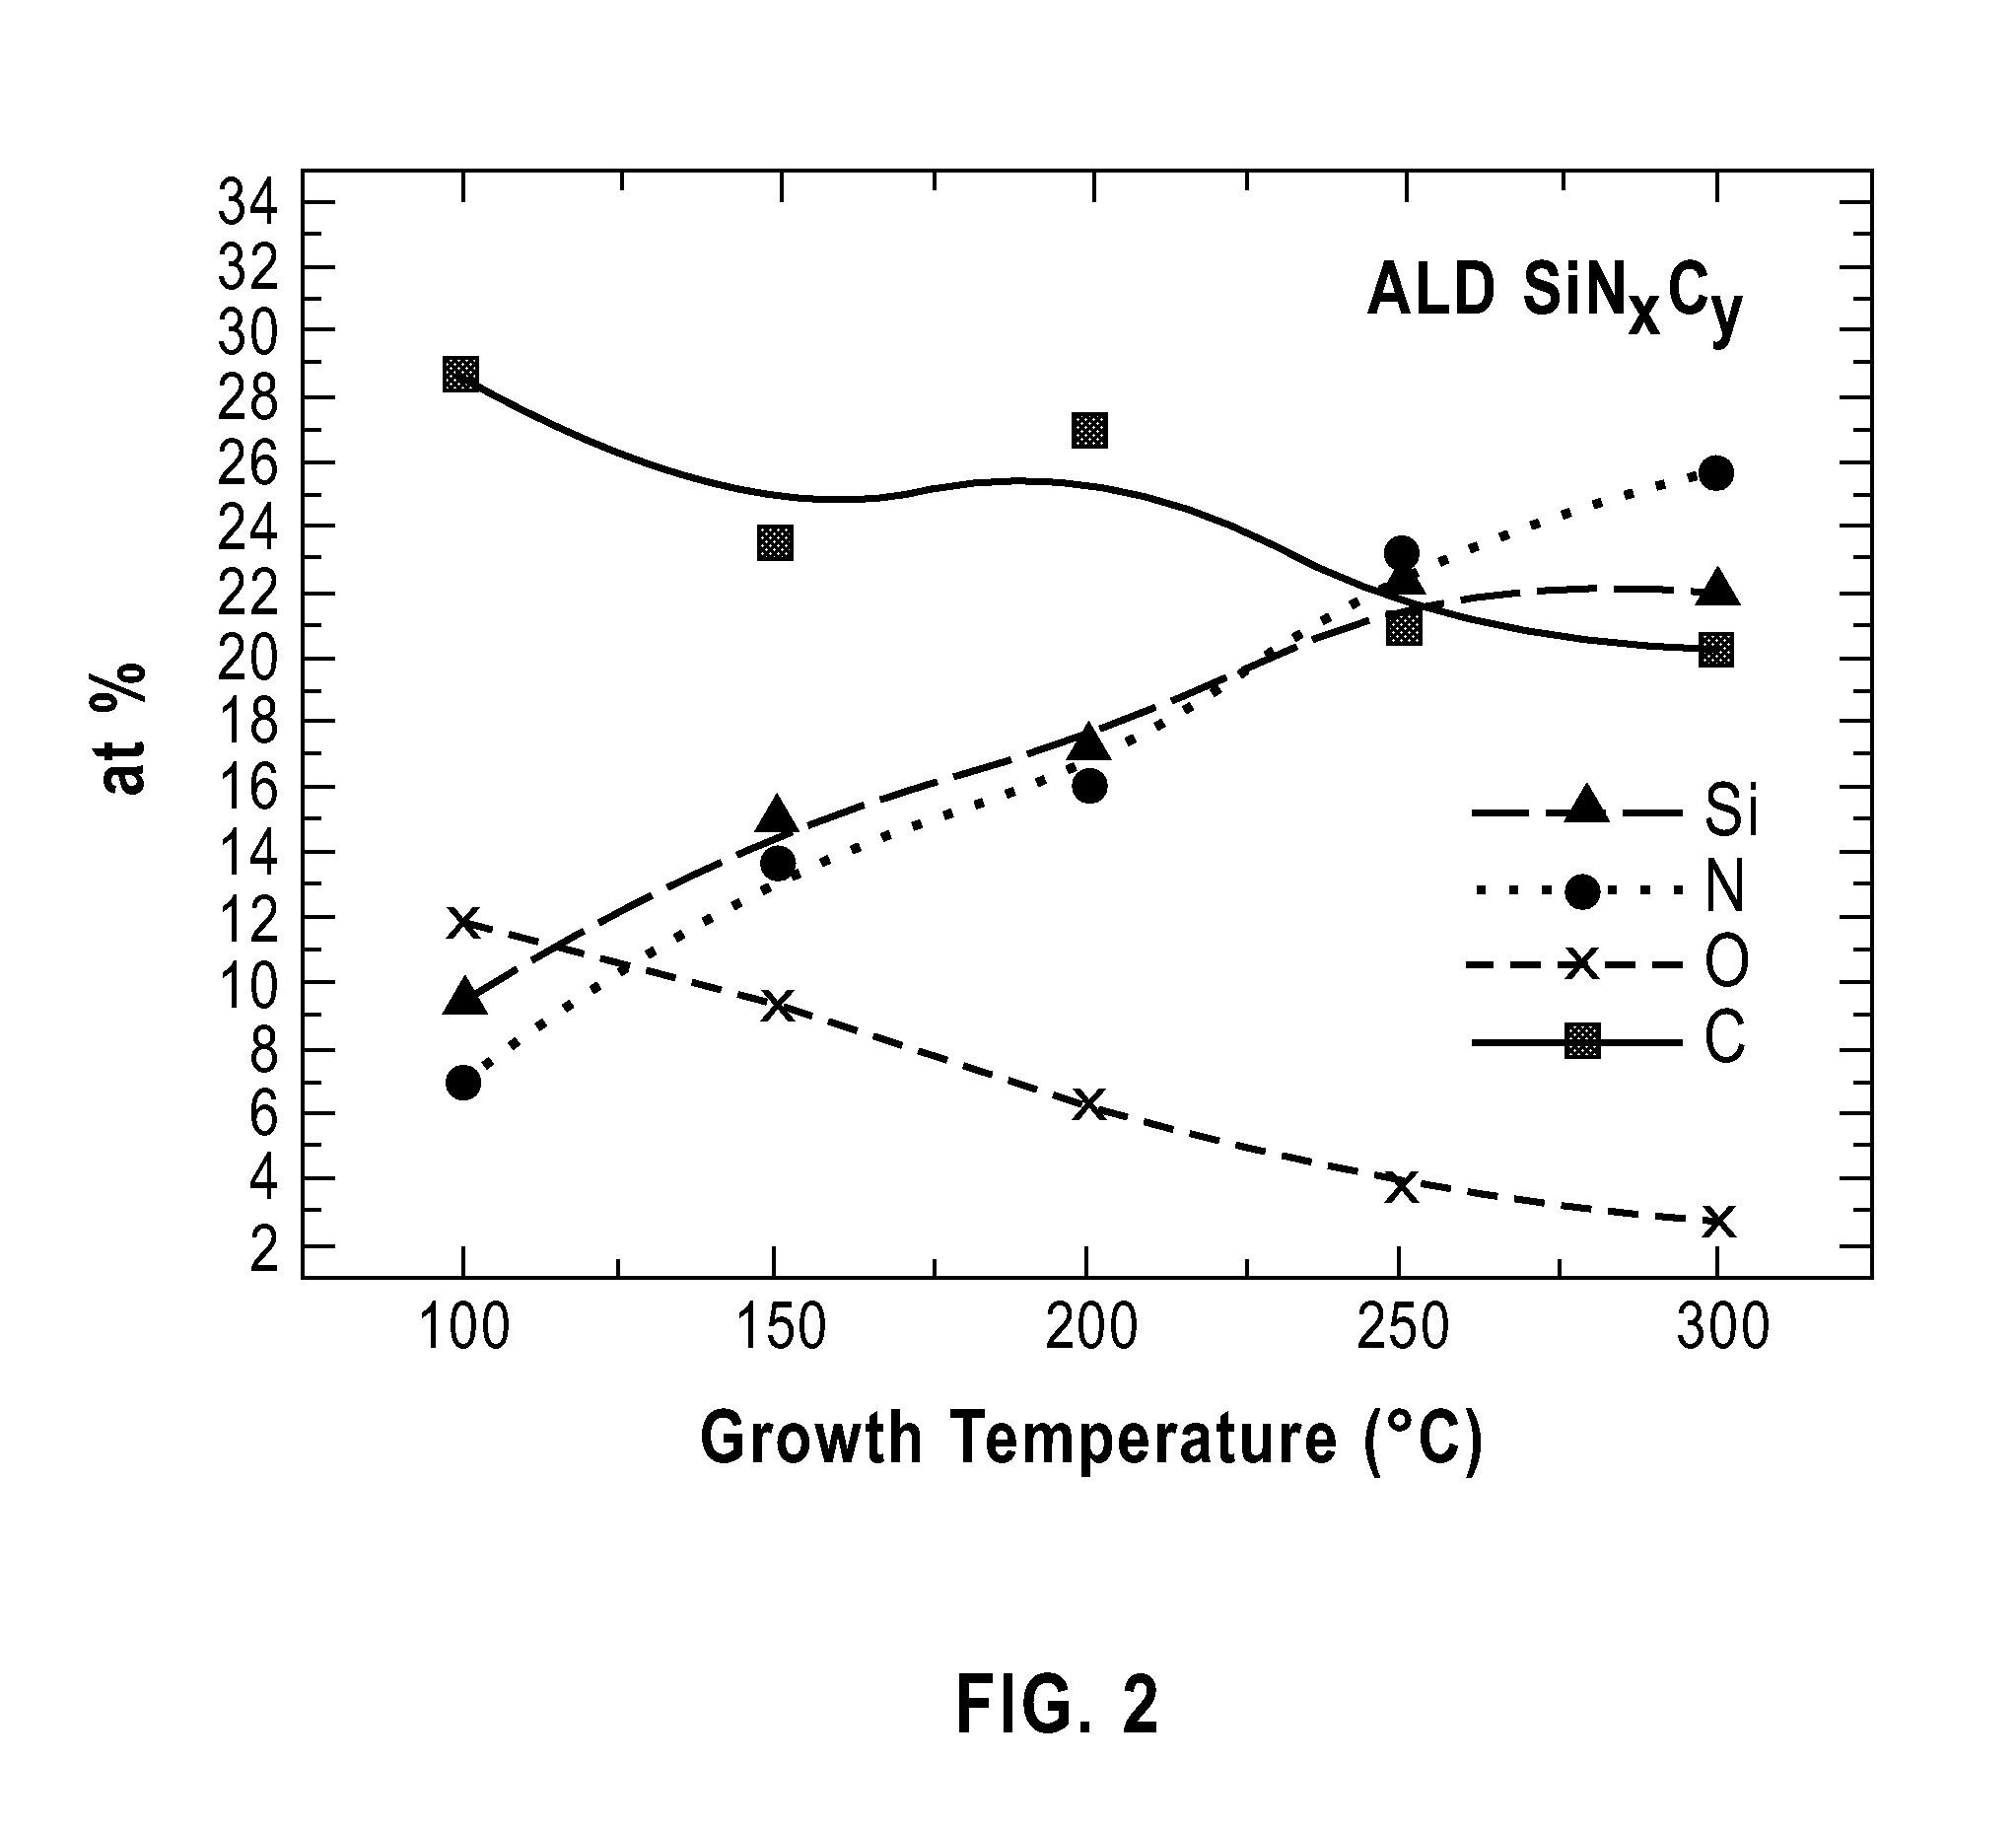 METHOD OF PE-ALD OF SiNxCy AND INTEGRATION OF LINER MATERIALS ON POROUS LOW K SUBSTRATES